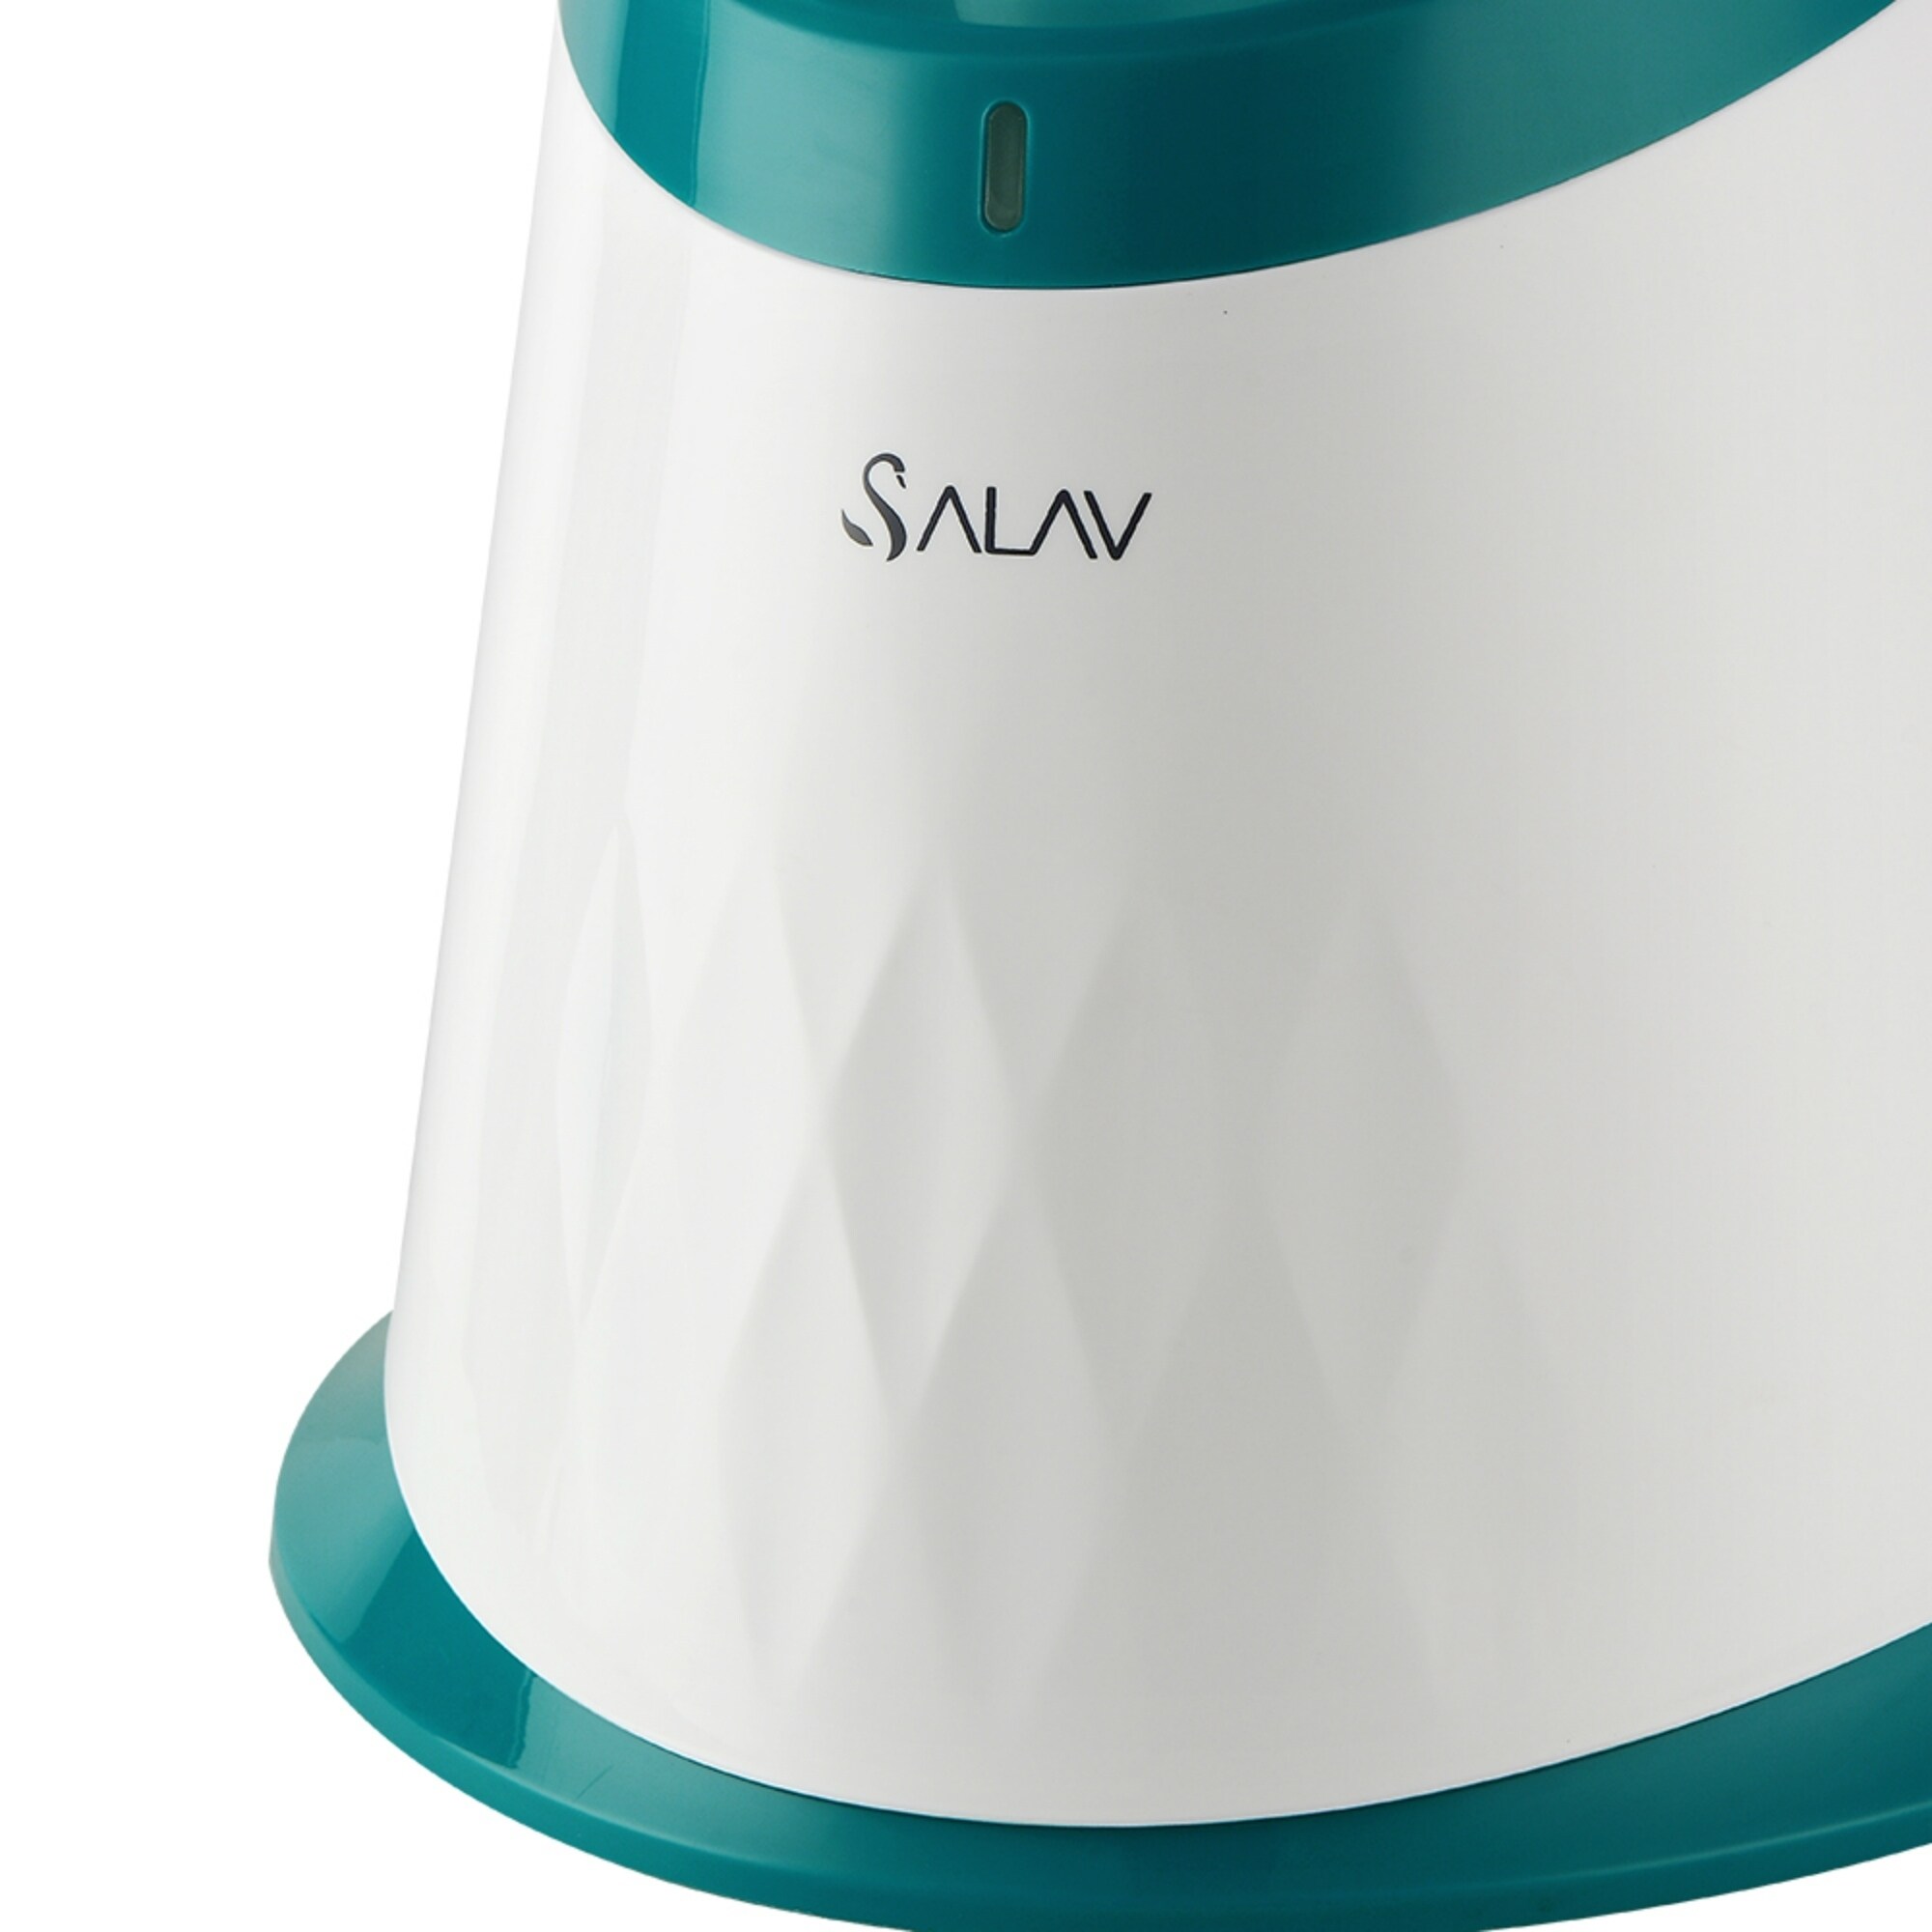 Xl-10 Performance Garment Steamer with 4 Steam Settings Teal Green